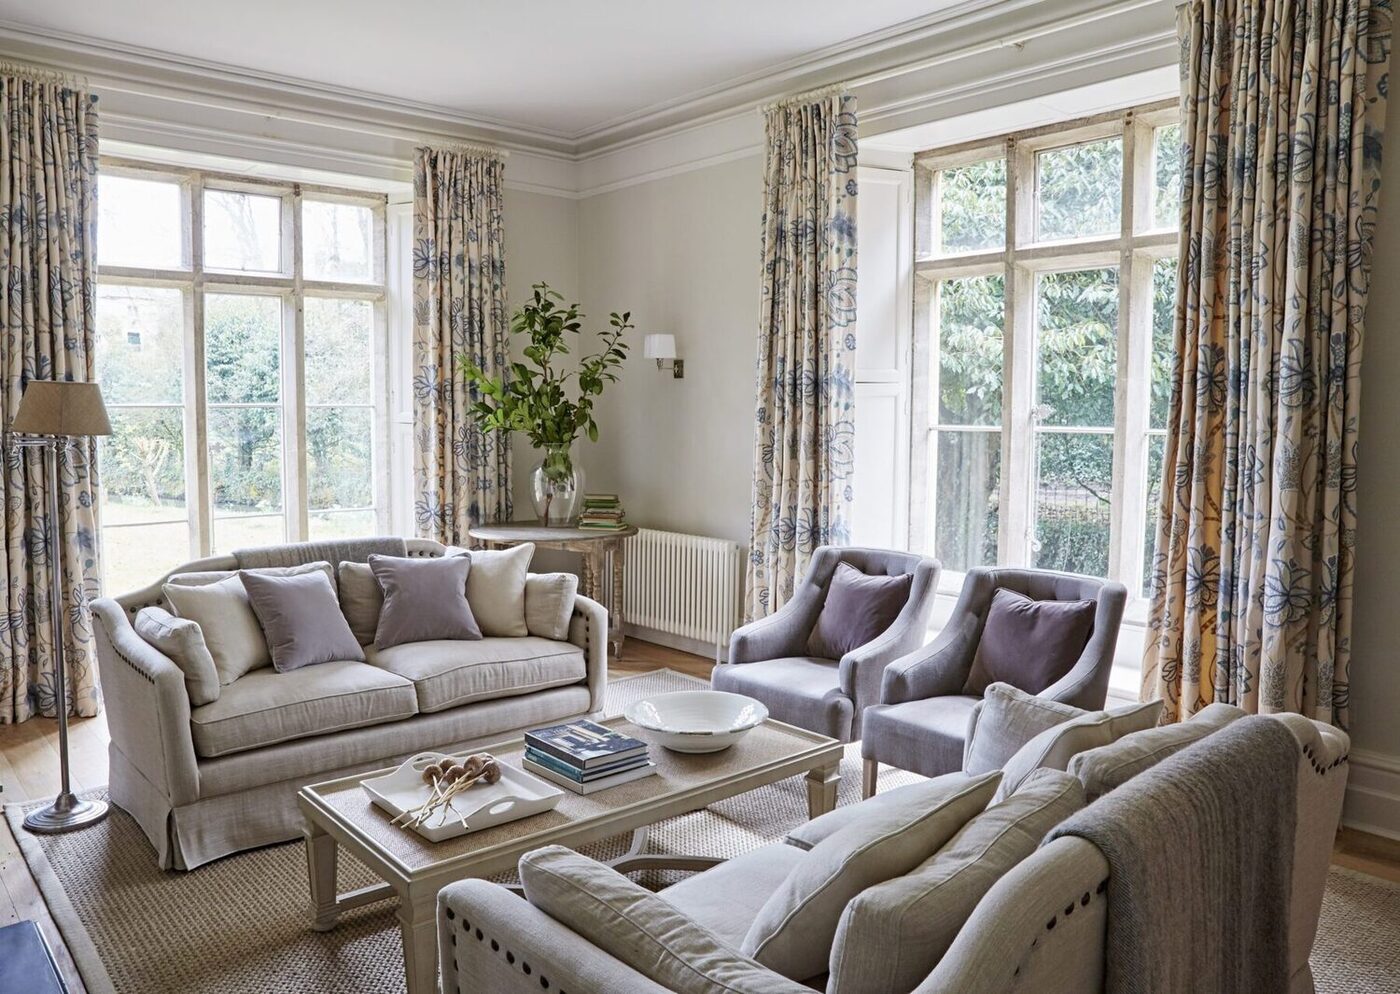 How To Design A Formal Living Room: Emma Sims Hilditch Advises On Creating Smart Spaces